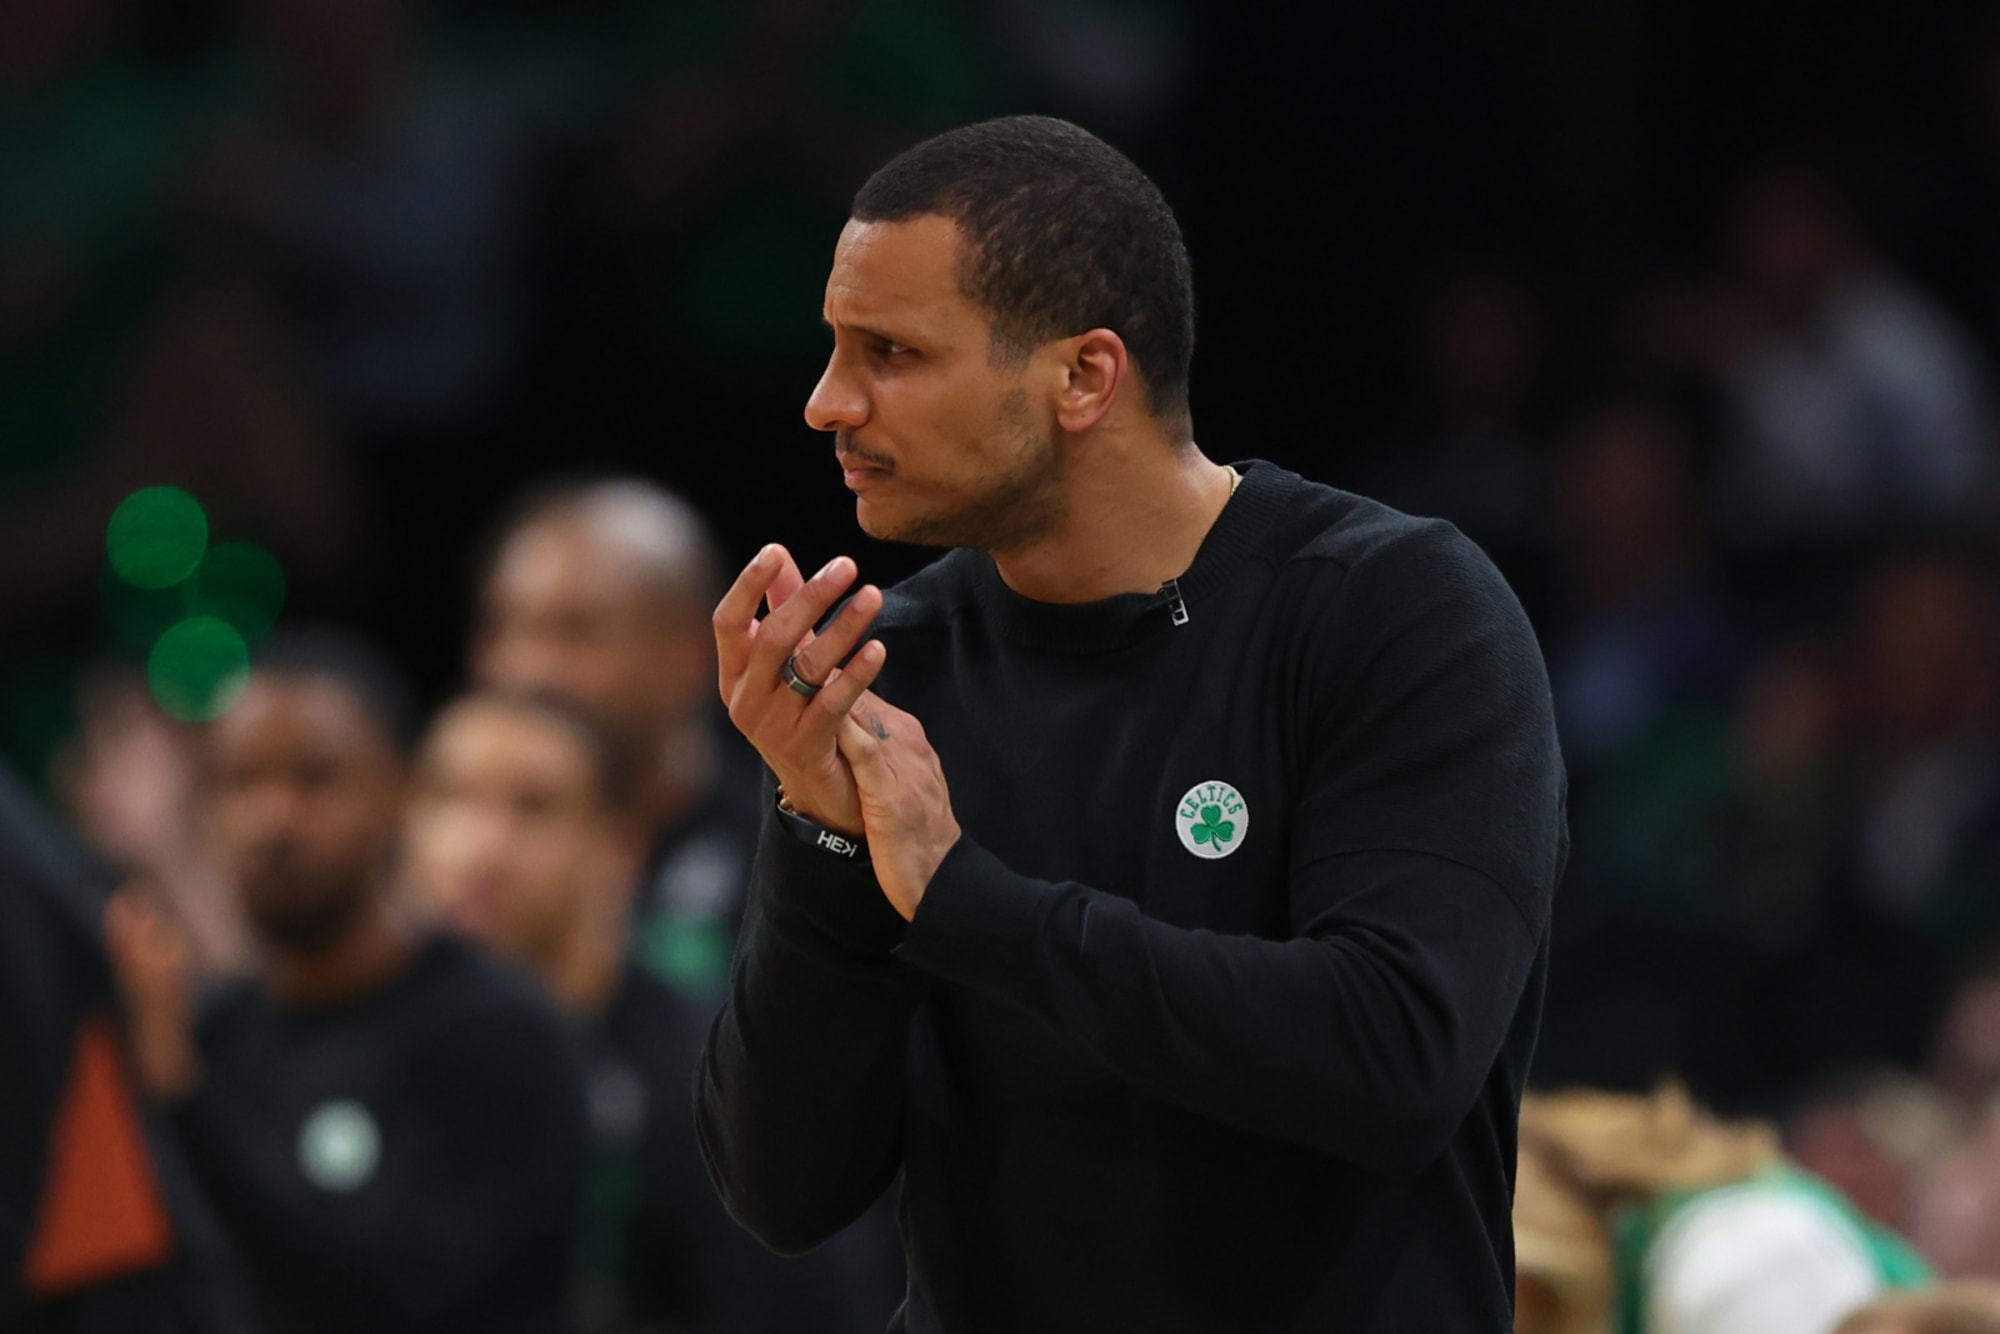 In the midst of a fire, Joe Mazzulla leads his Boston Celtics one step from revival